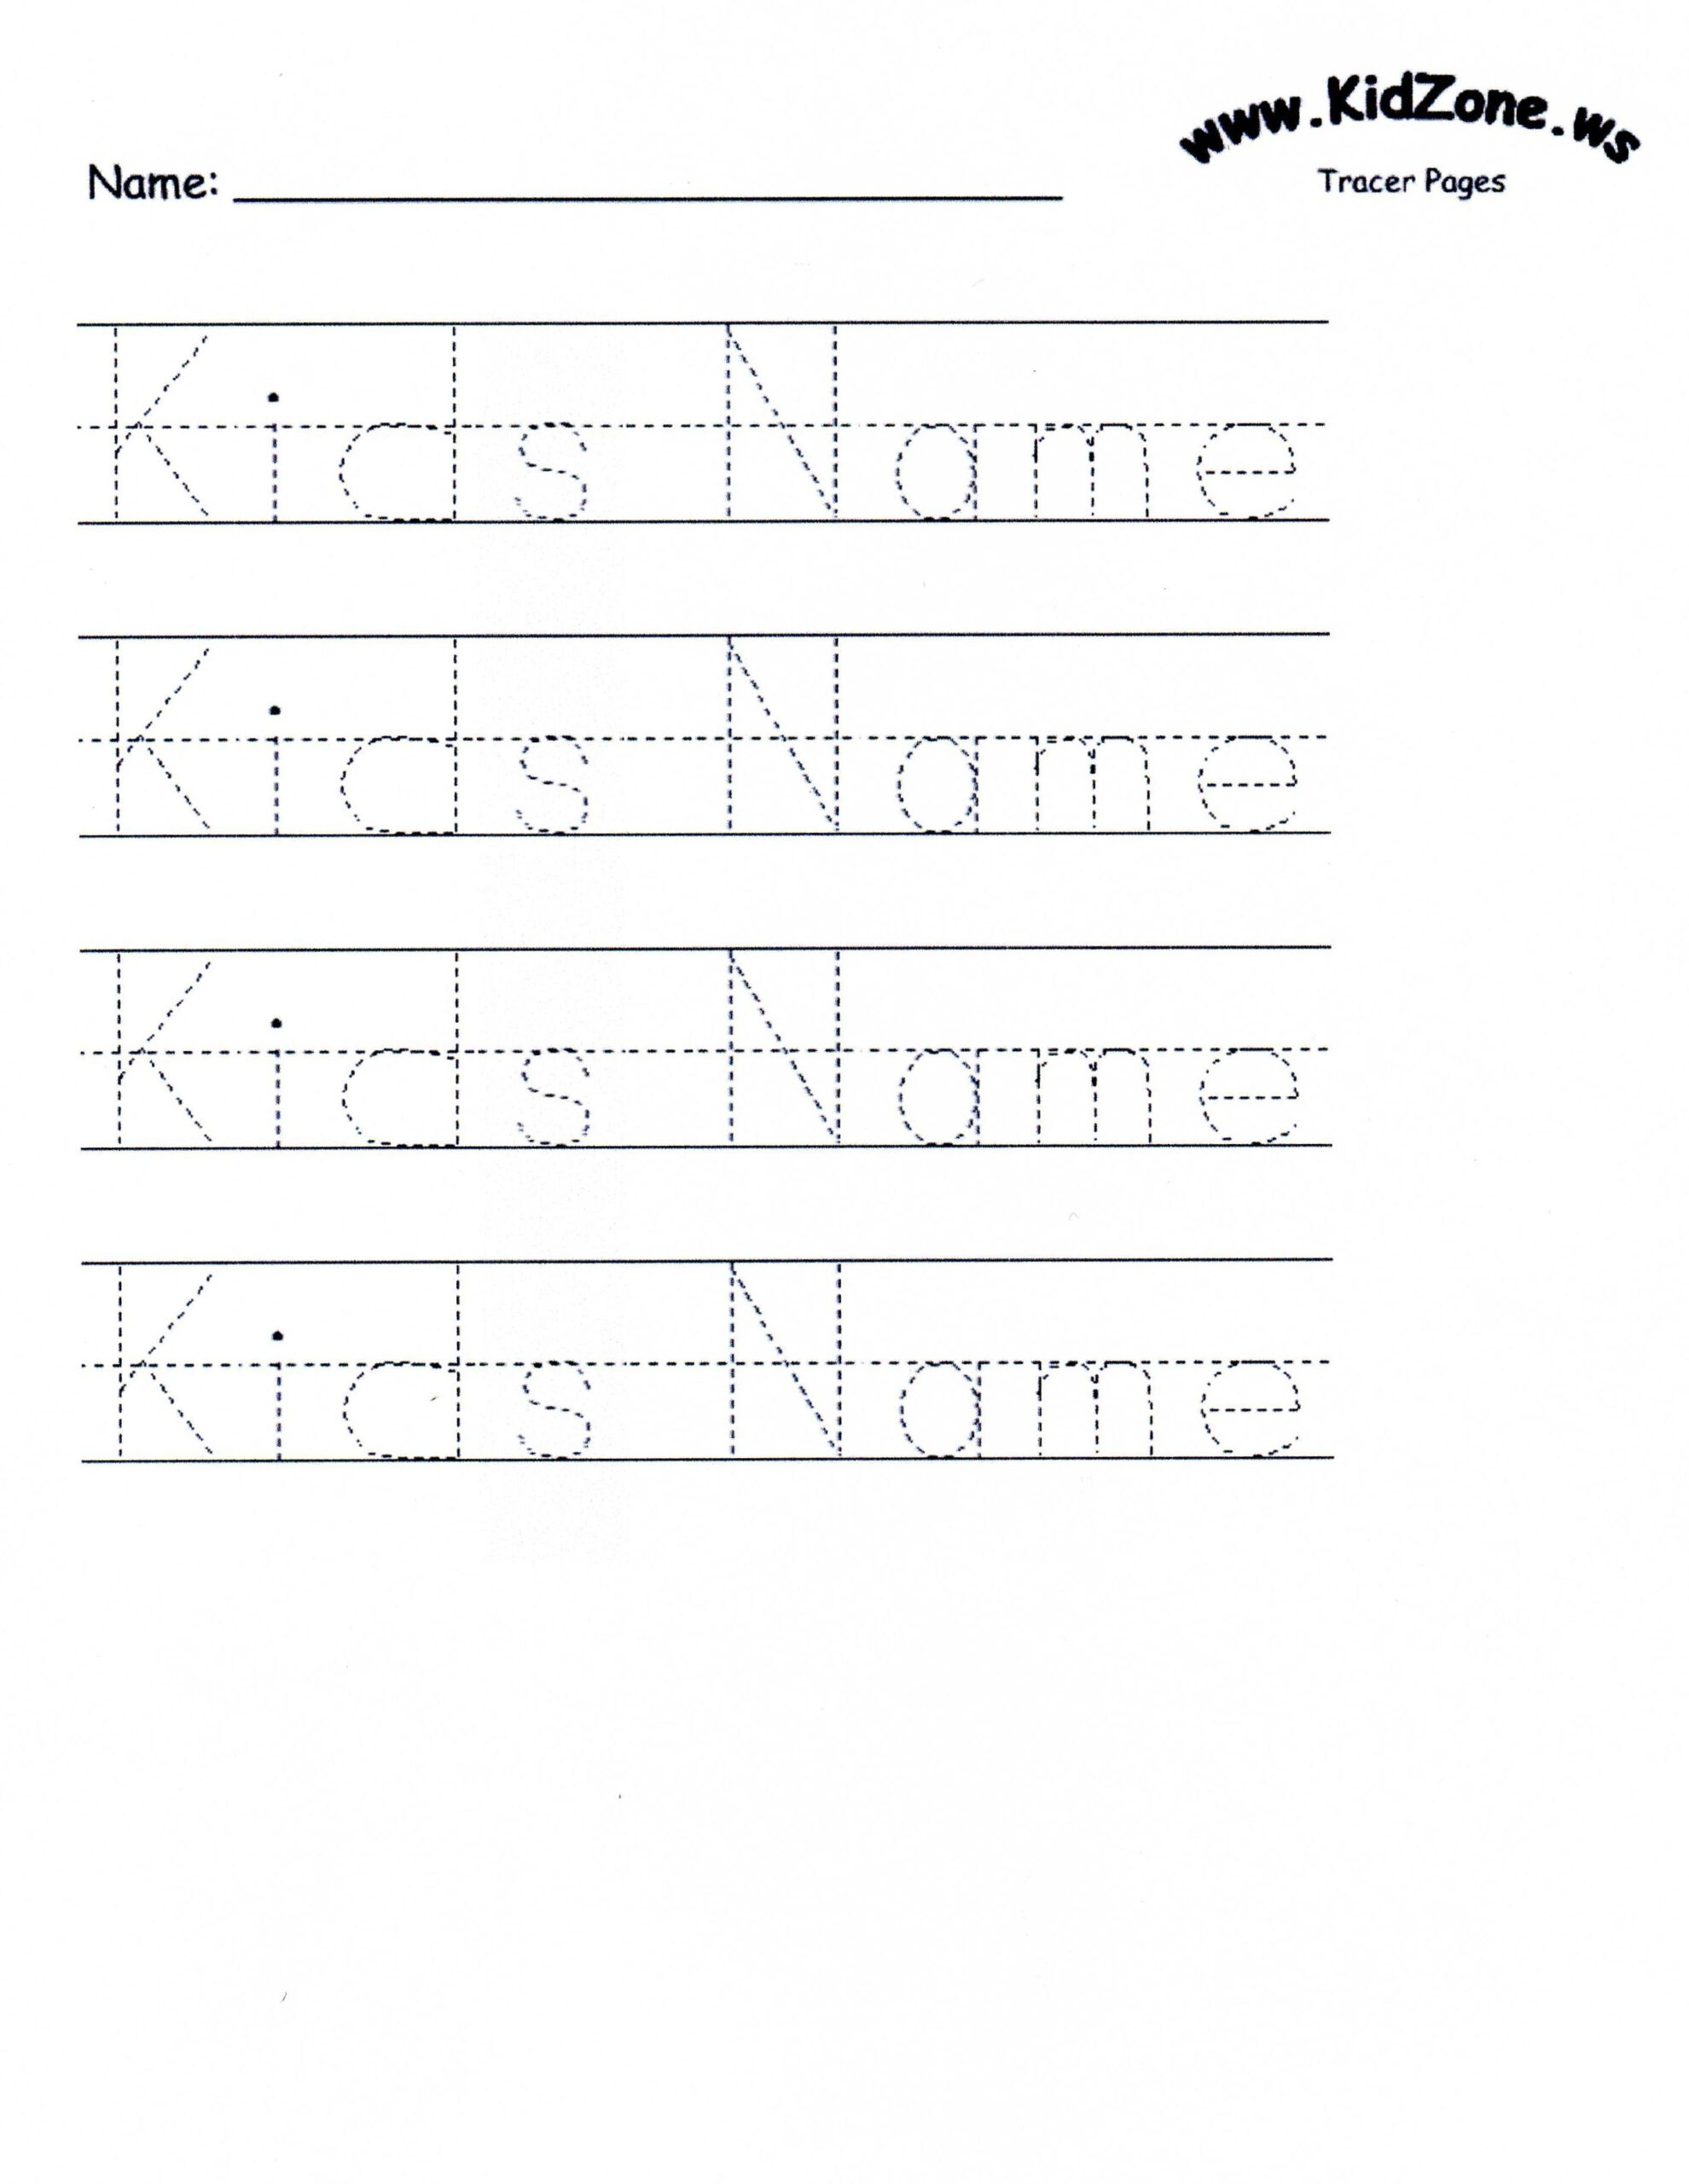 Customizable Printable Letter Pages | Name Tracing in Name Tracing Worksheet Creator